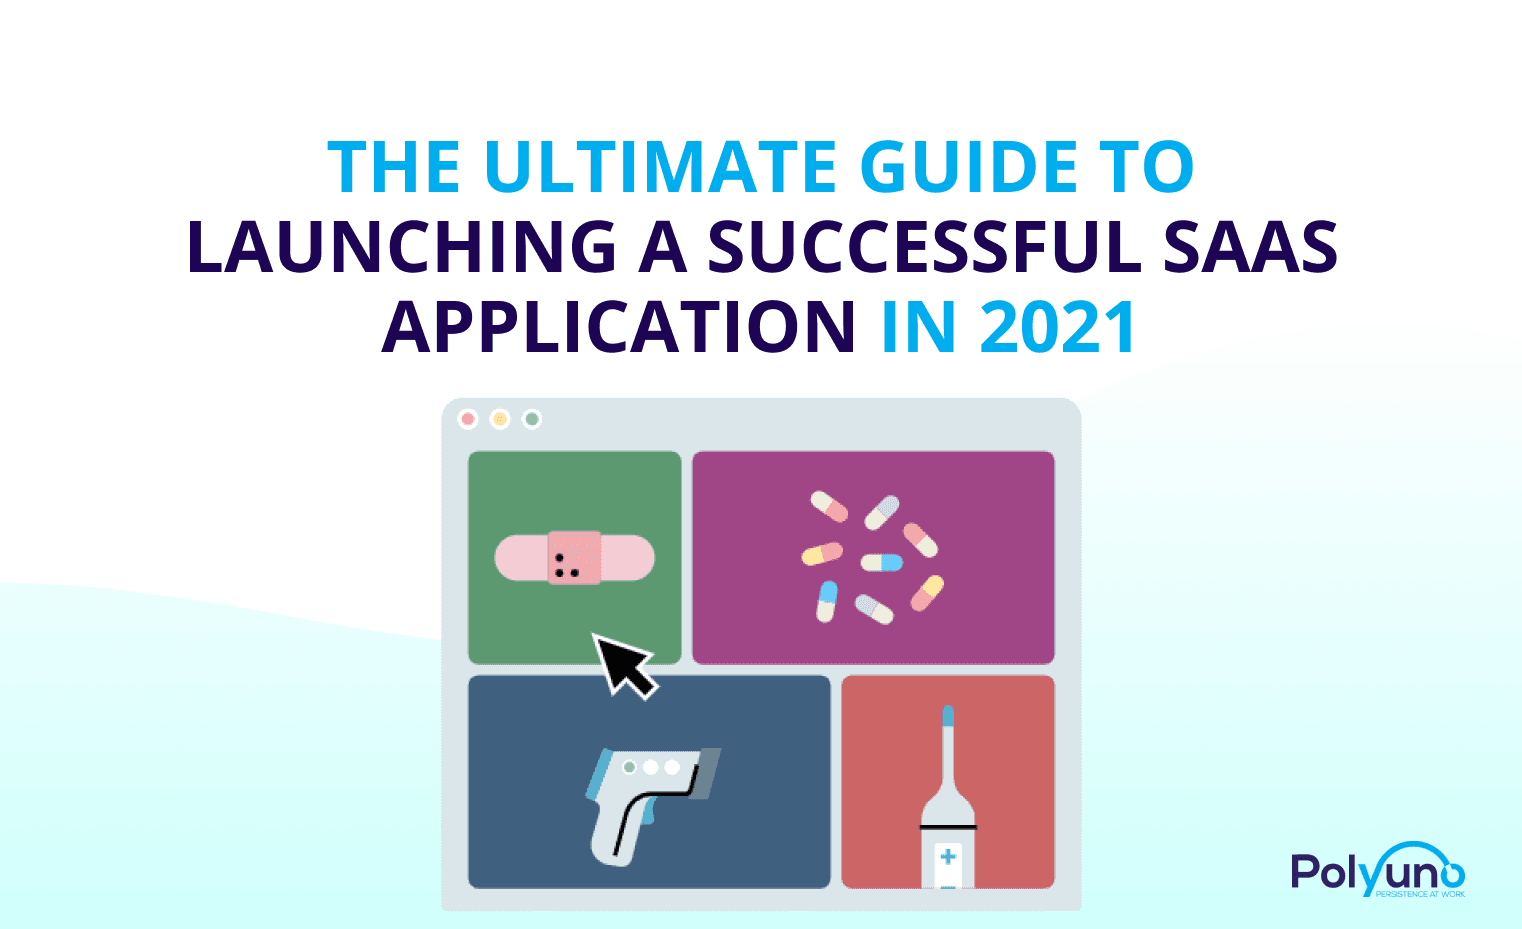 The Ultimate Guide To Launching A Successful SaaS Application in 2021